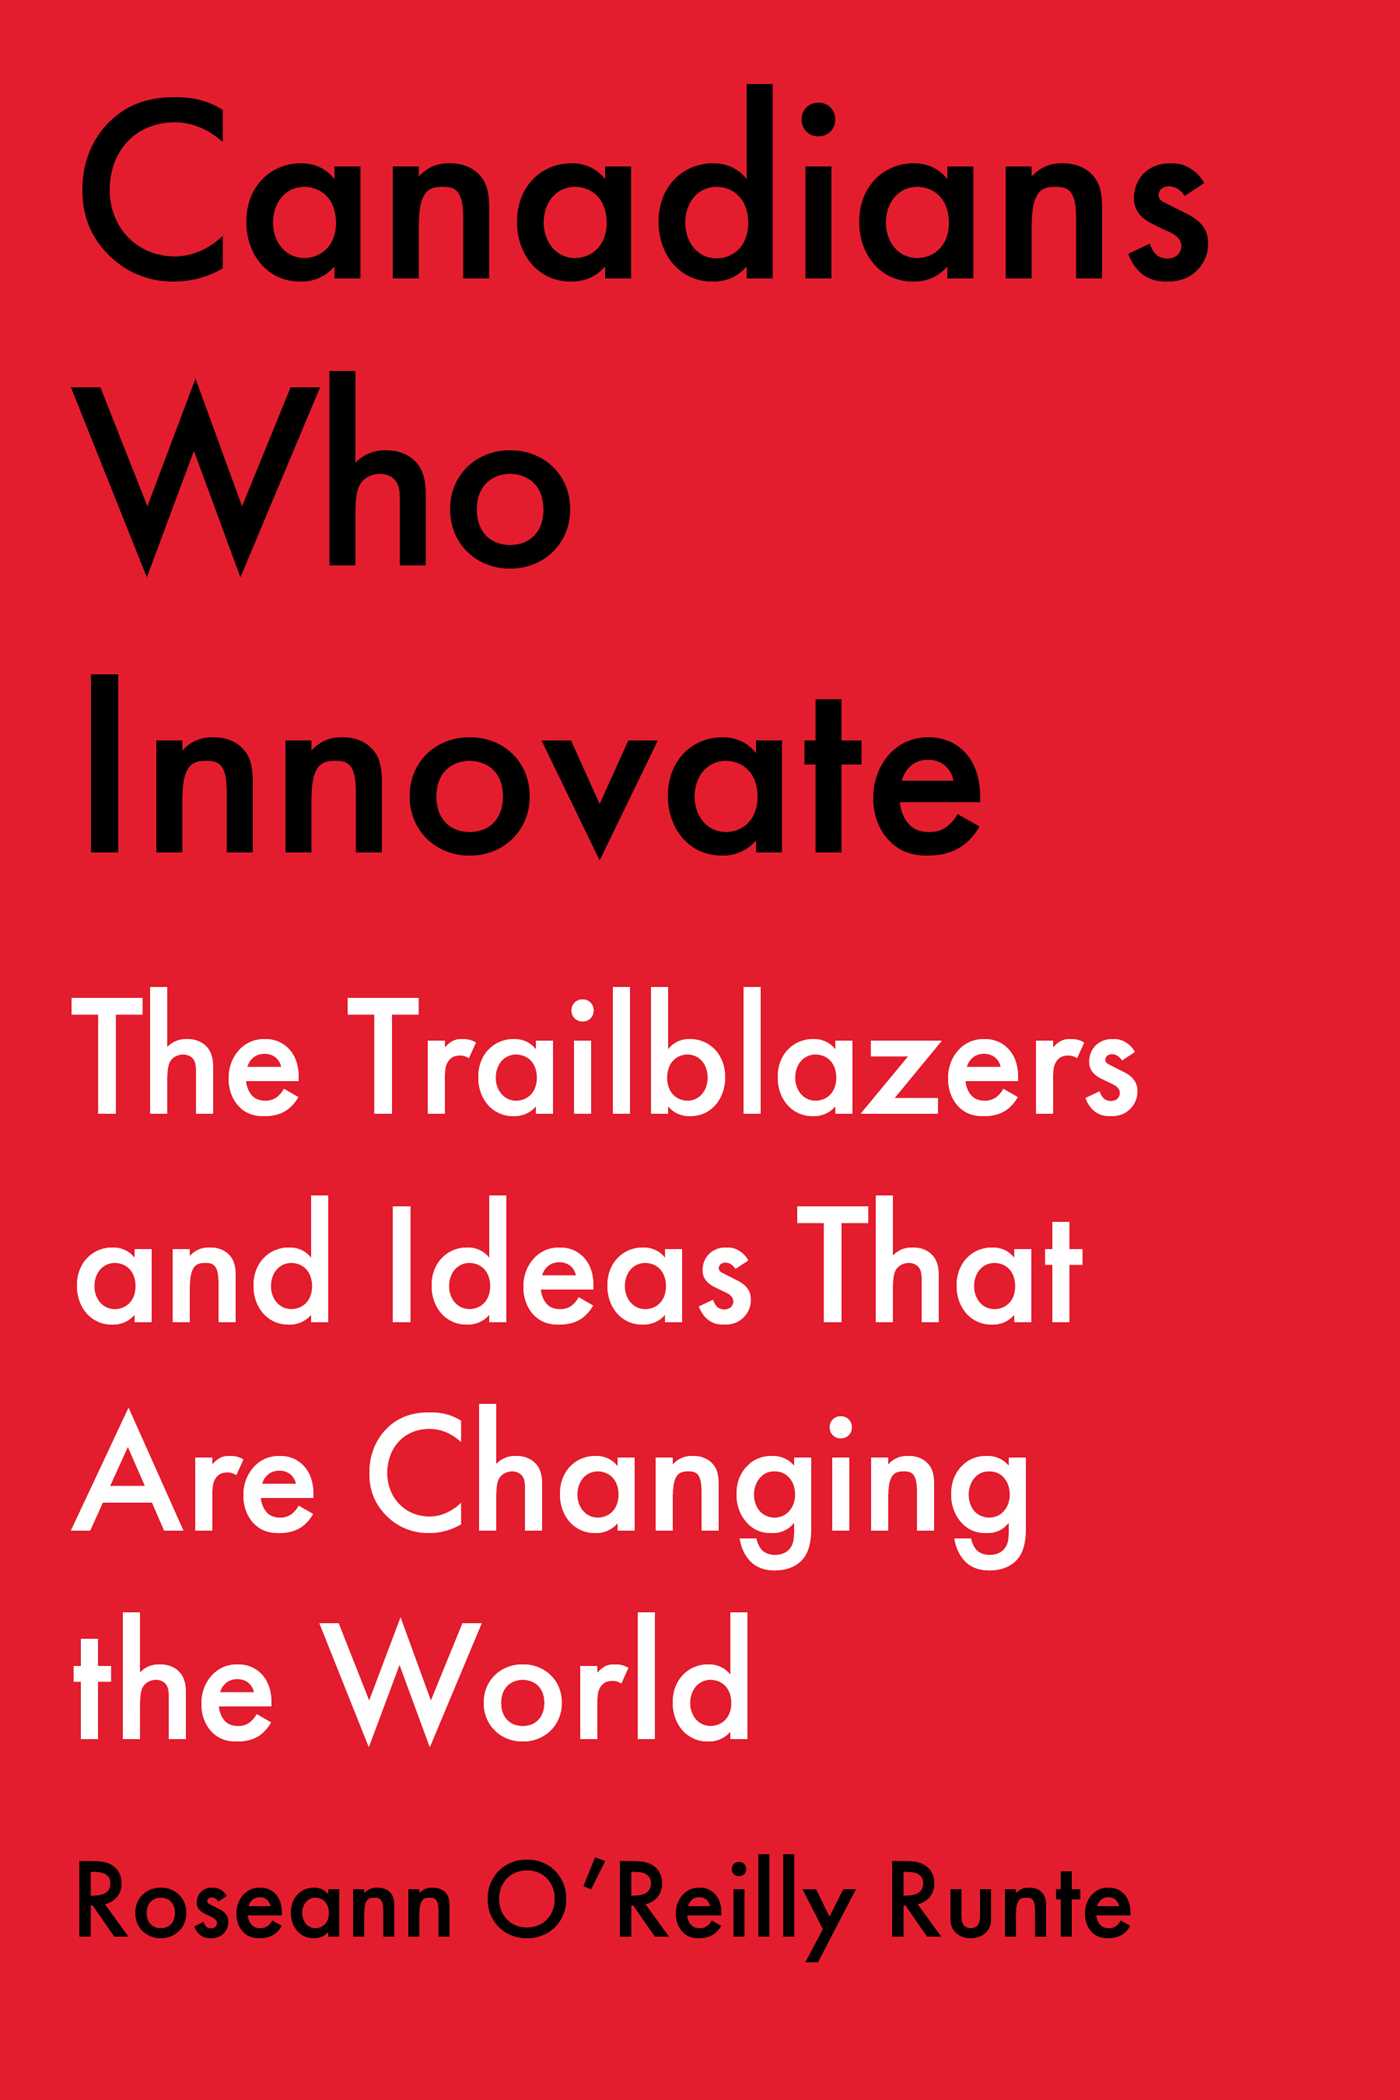 CANADIANS WHO INNOVATE : THE TRAILBLAZERS AND IDEAS THAT ARE CHANGING THE WORLD, by O'REILLY RUNTE , ROSEANN